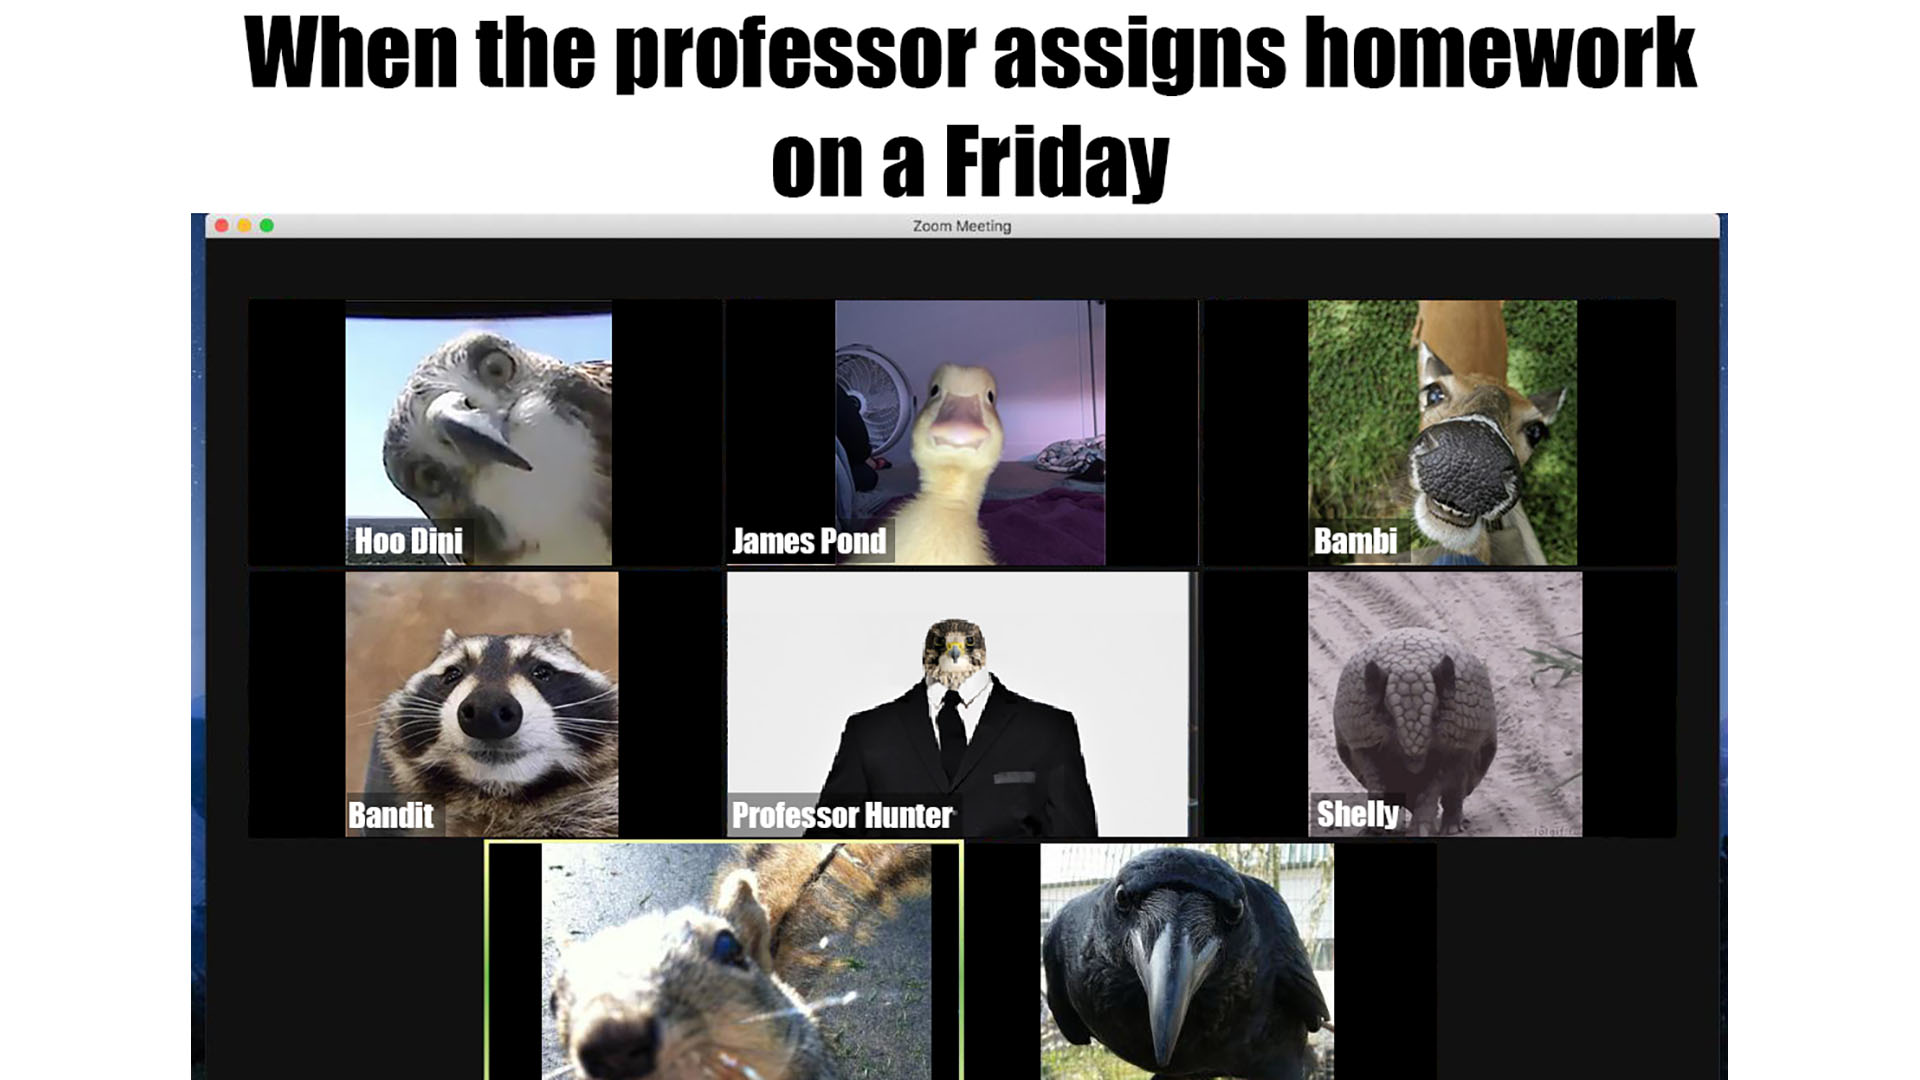 Title: When the Professor Assigns Homework on a Friday. A series of adorable animals with wacky names like James Pond are on a Zoom call.